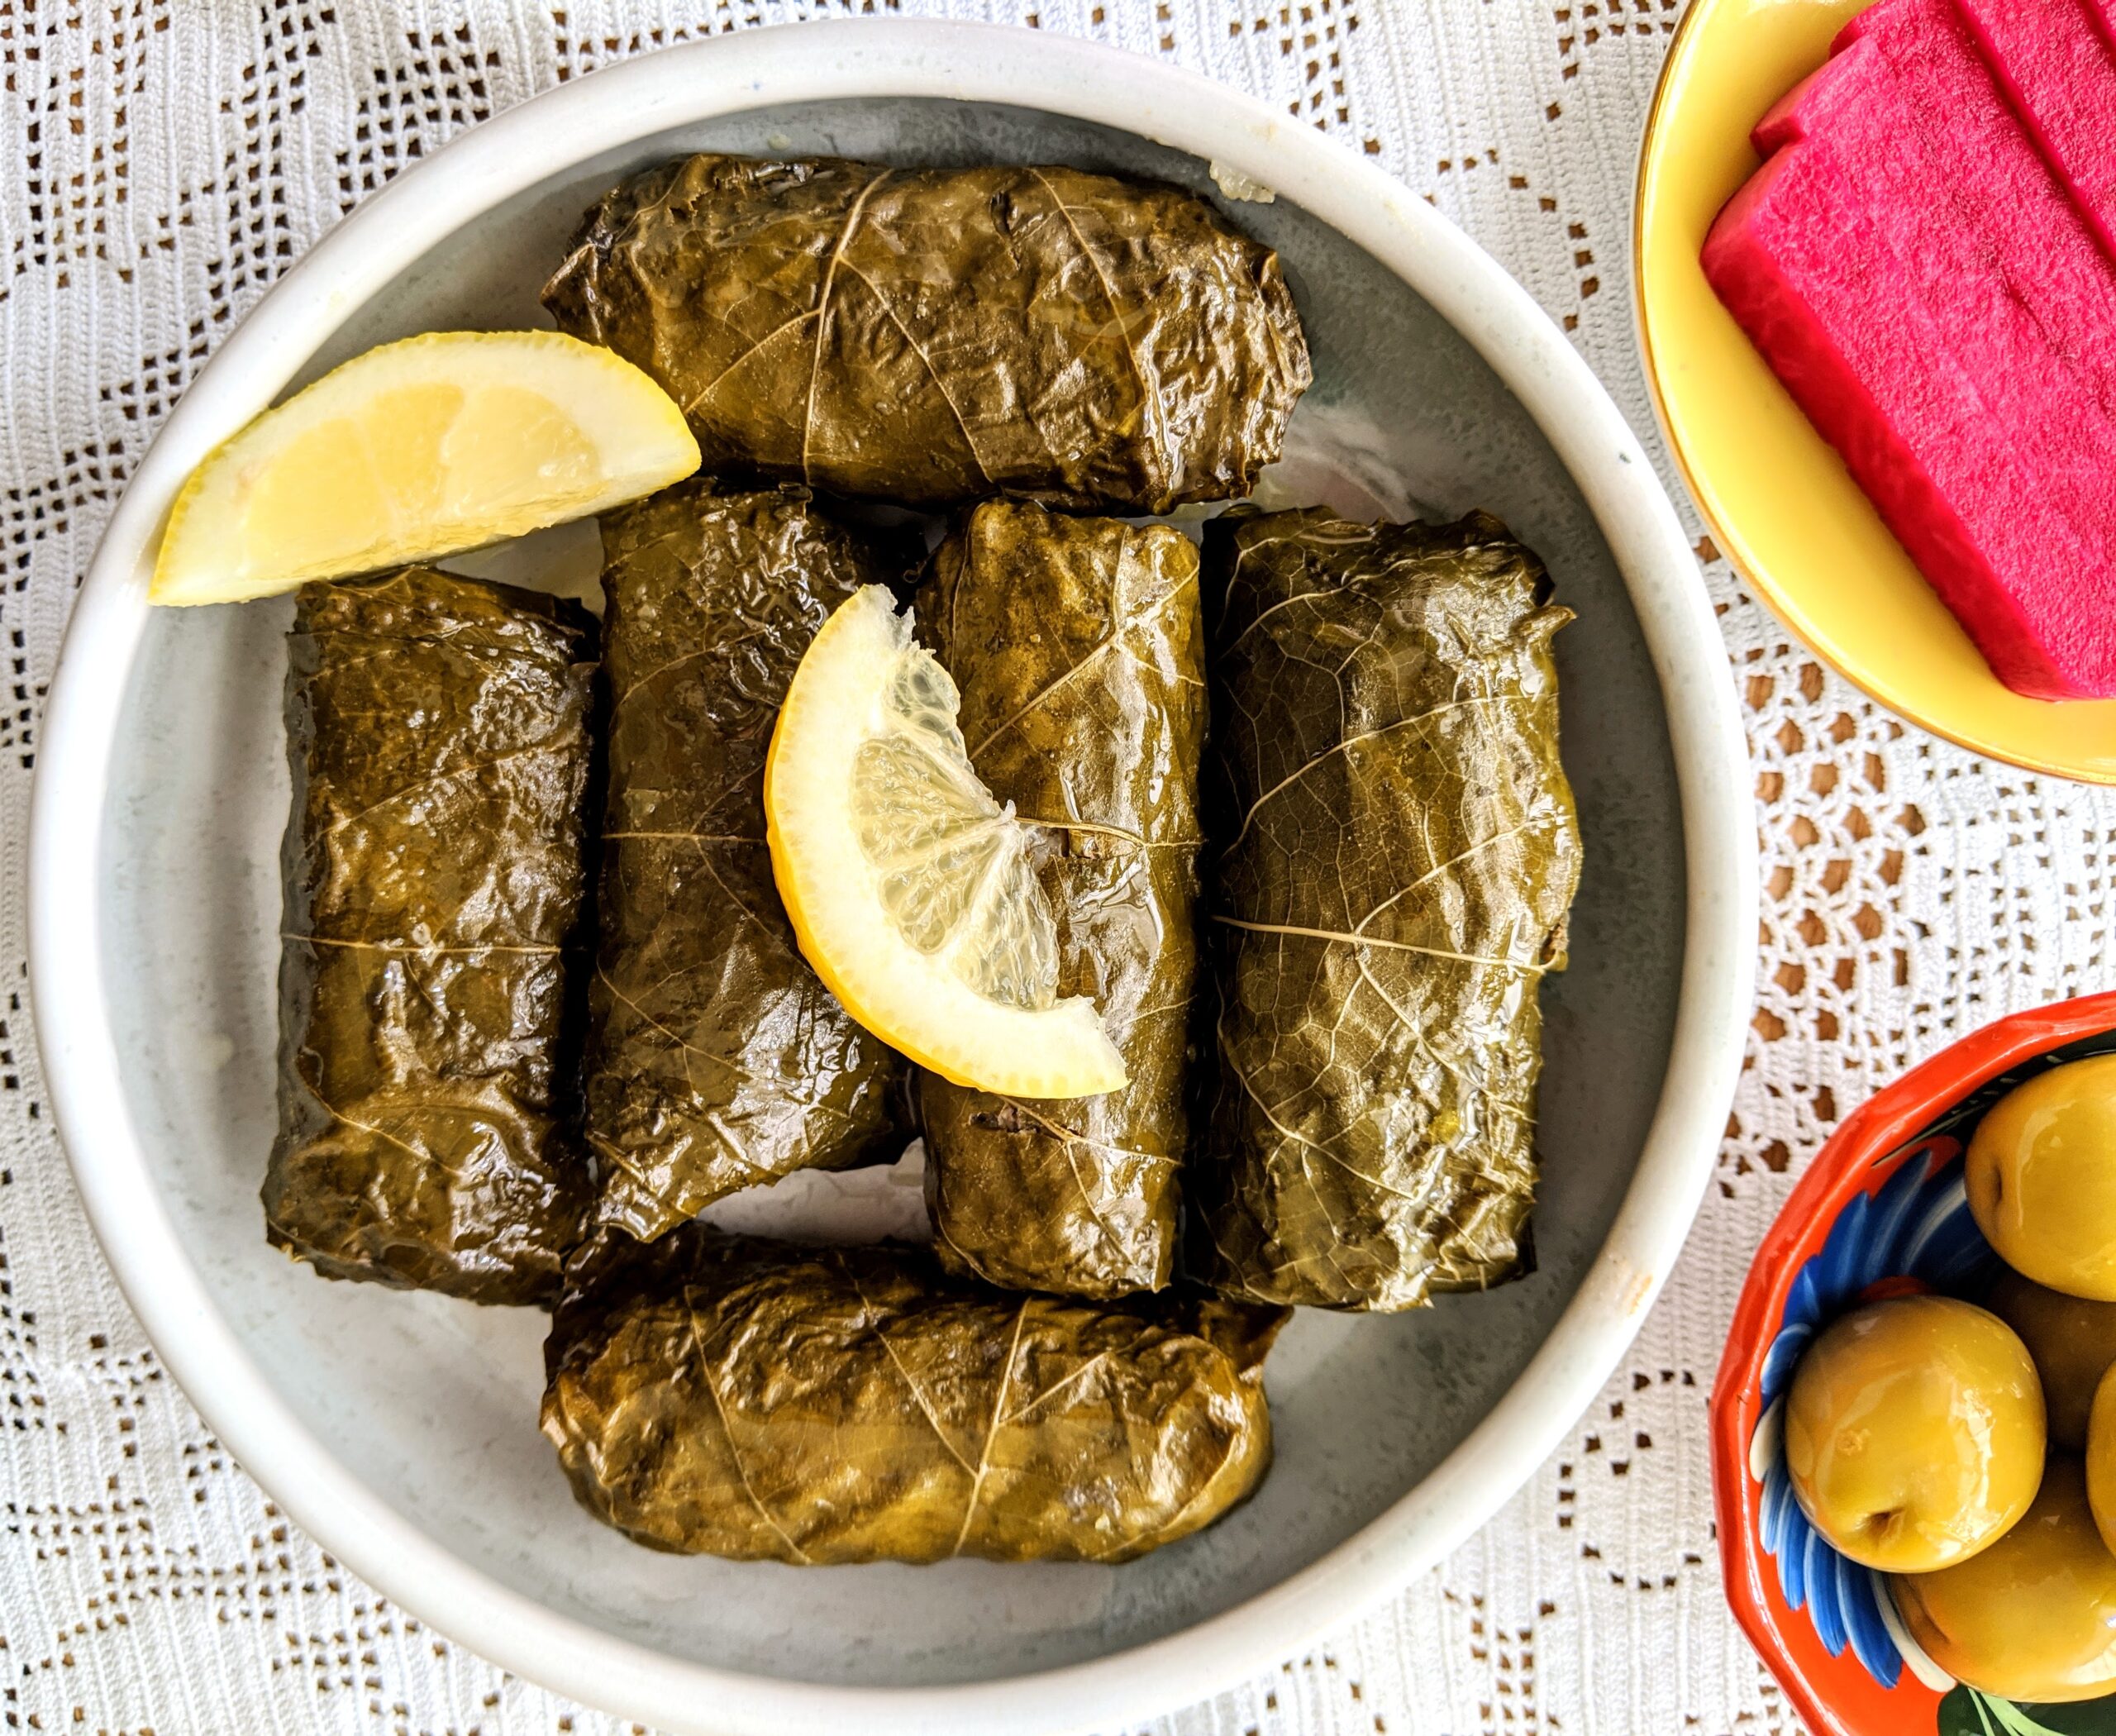 A plate full of lamb stuffed grape leaves, served with lemon wedges, bright pink pickled turnips, and large green olives.